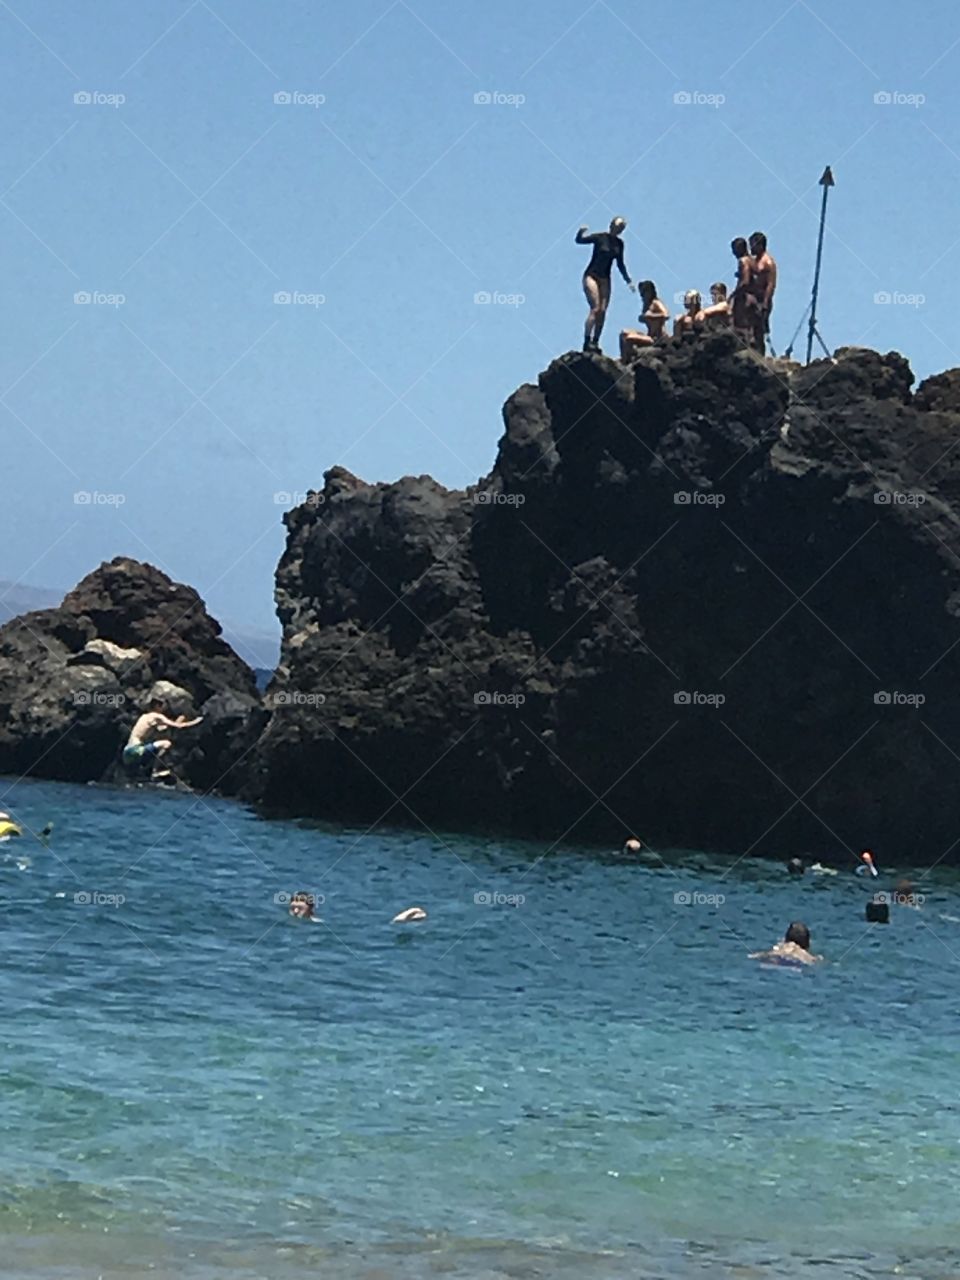 The Famous Black Rock in Maui